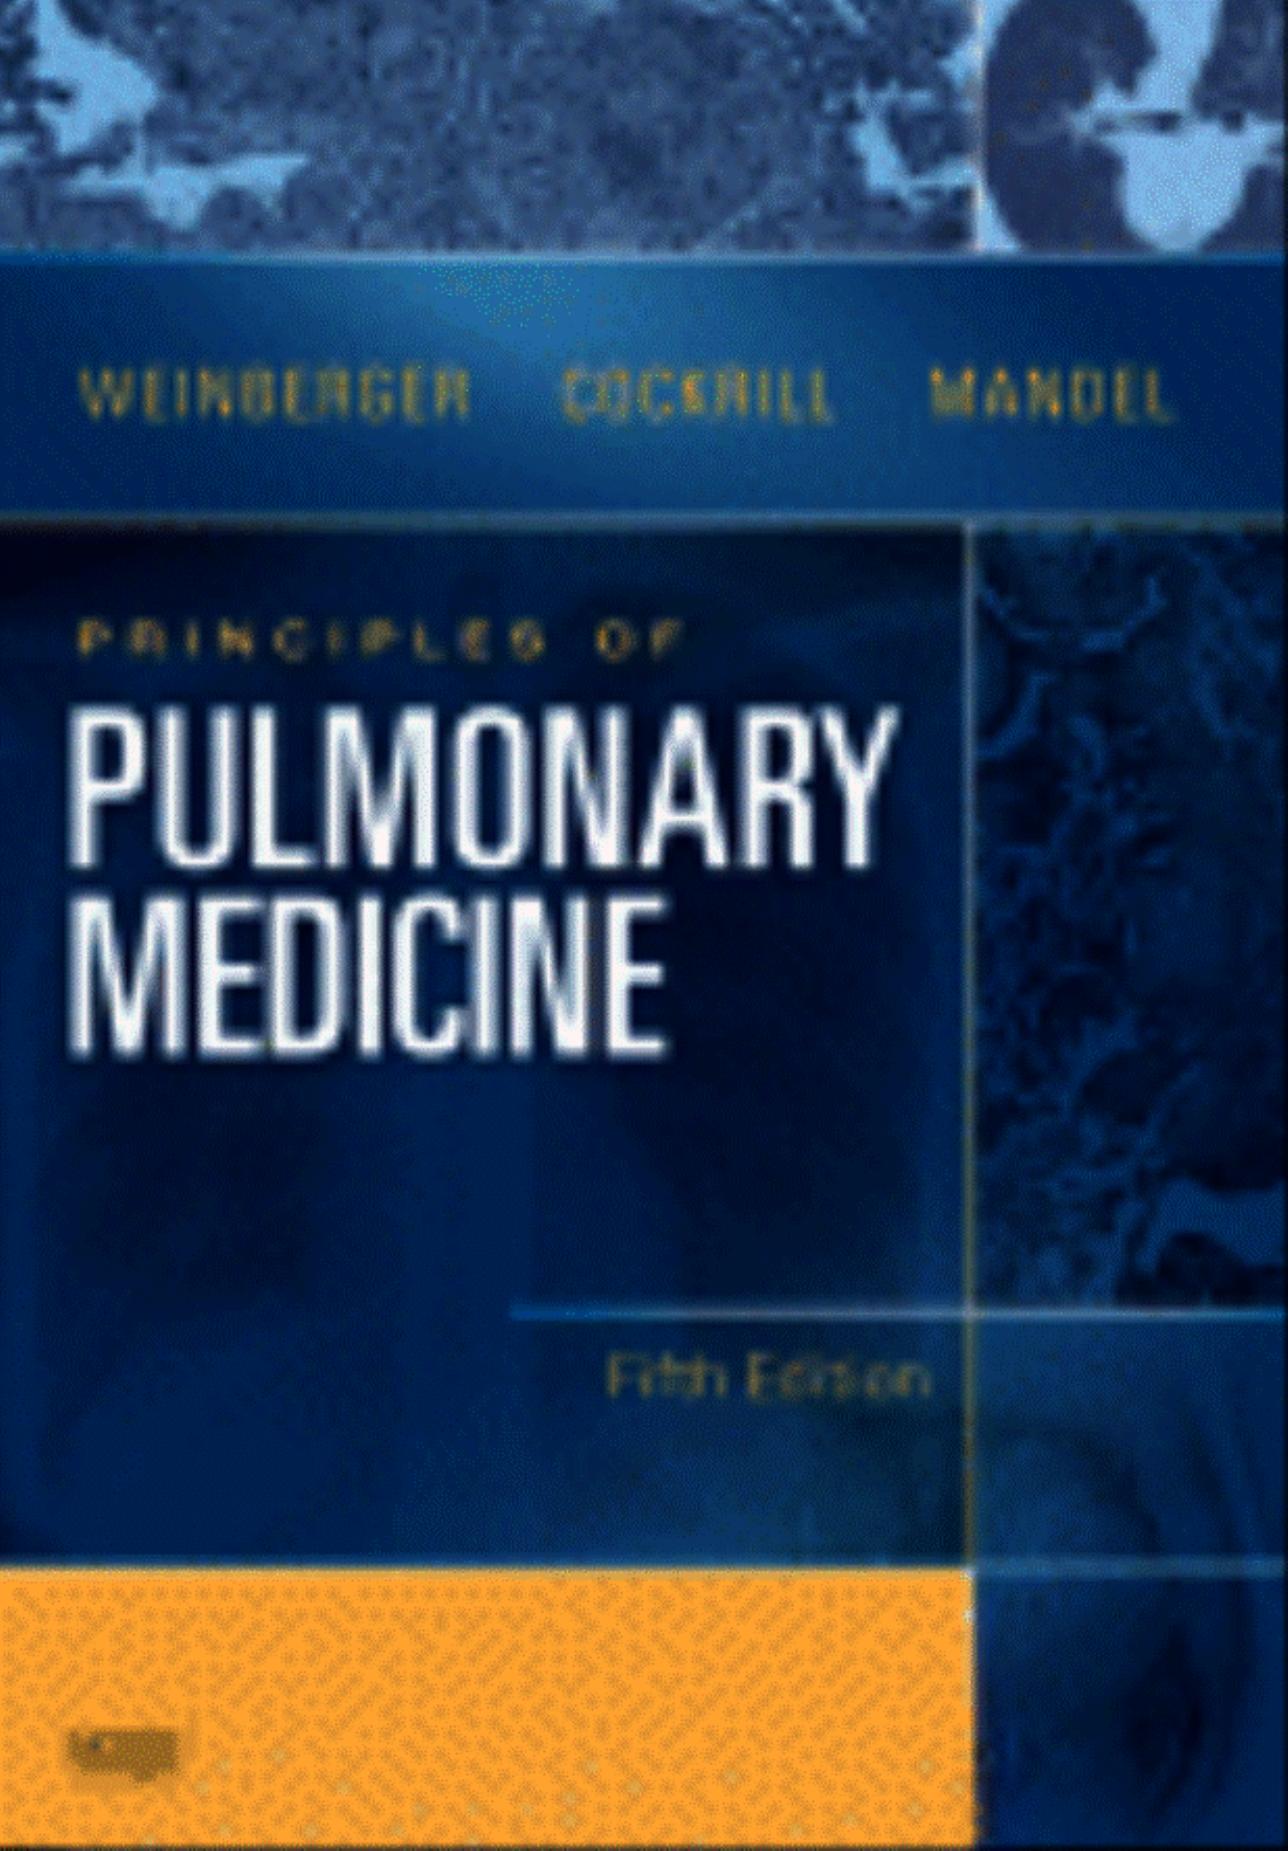 Principles of Pulmonary Medicine (5th Edition) by Unknown